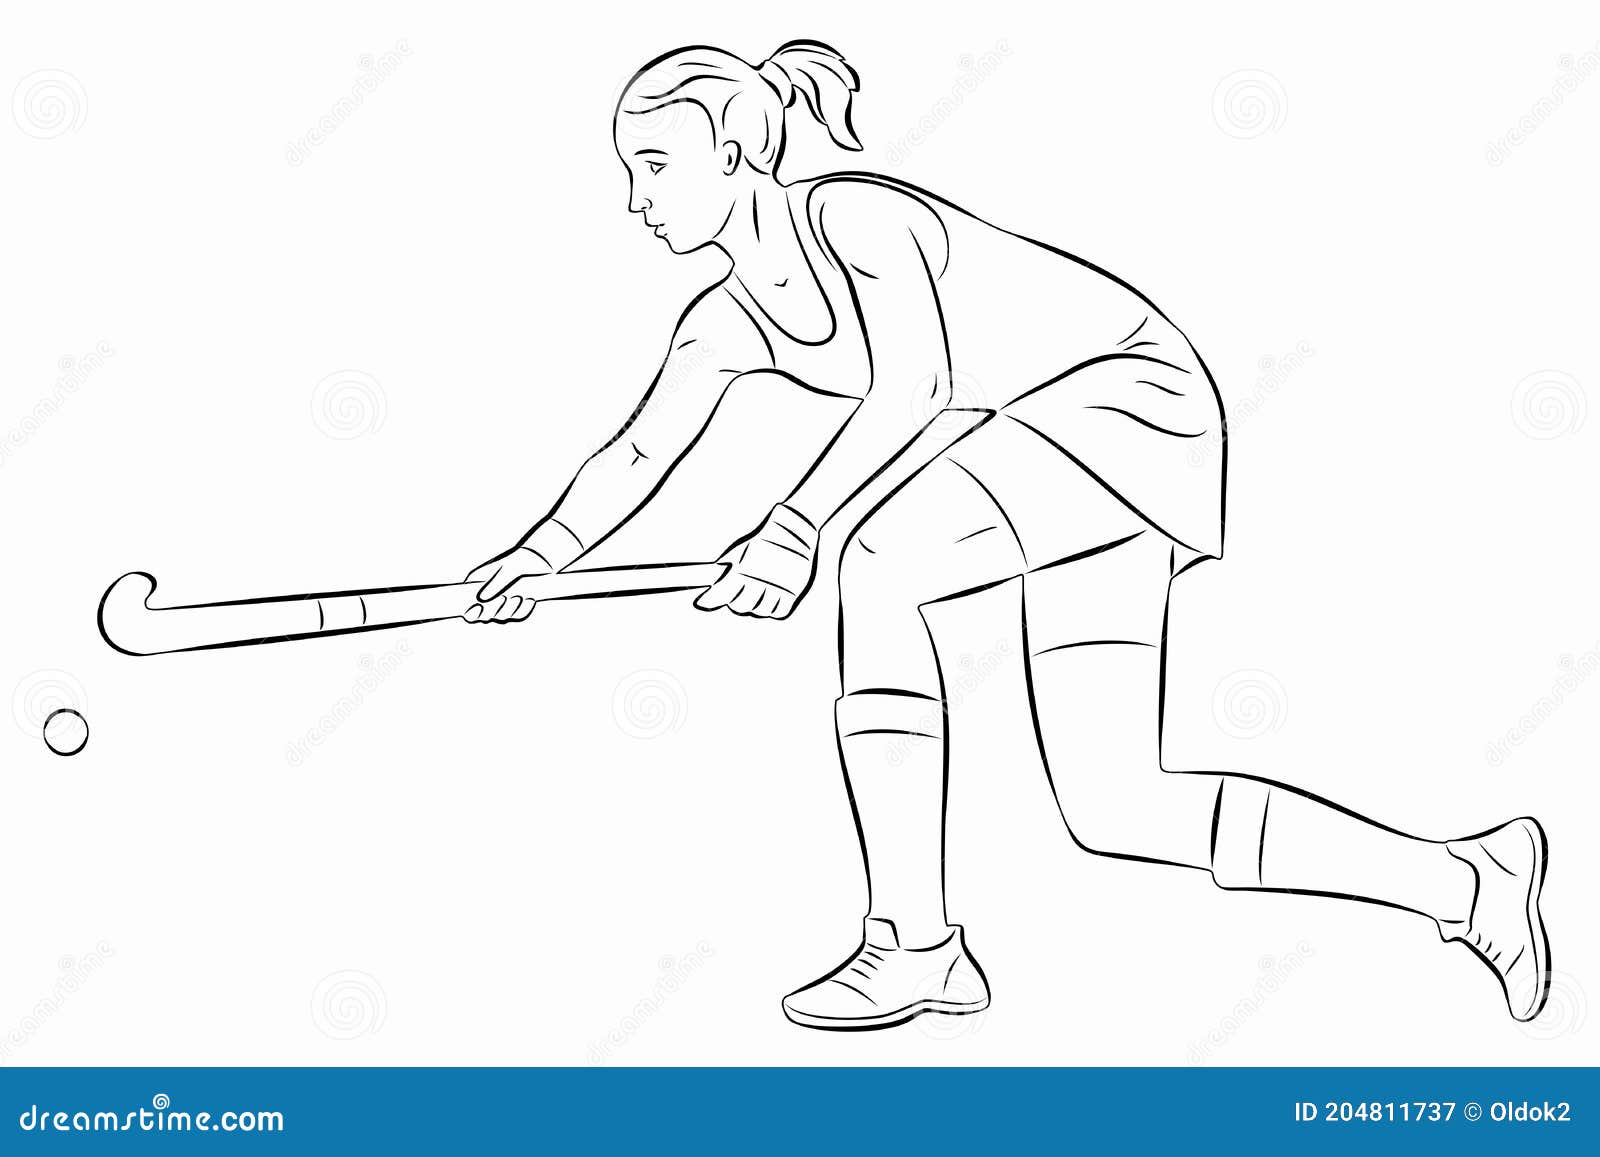 Continuous Line Illustration Of A Field Hockey Player With Hockey Stick  Running About To Hit Ball Done In Black And White Monoline Style Royalty  Free SVG Cliparts Vectors And Stock Illustration Image